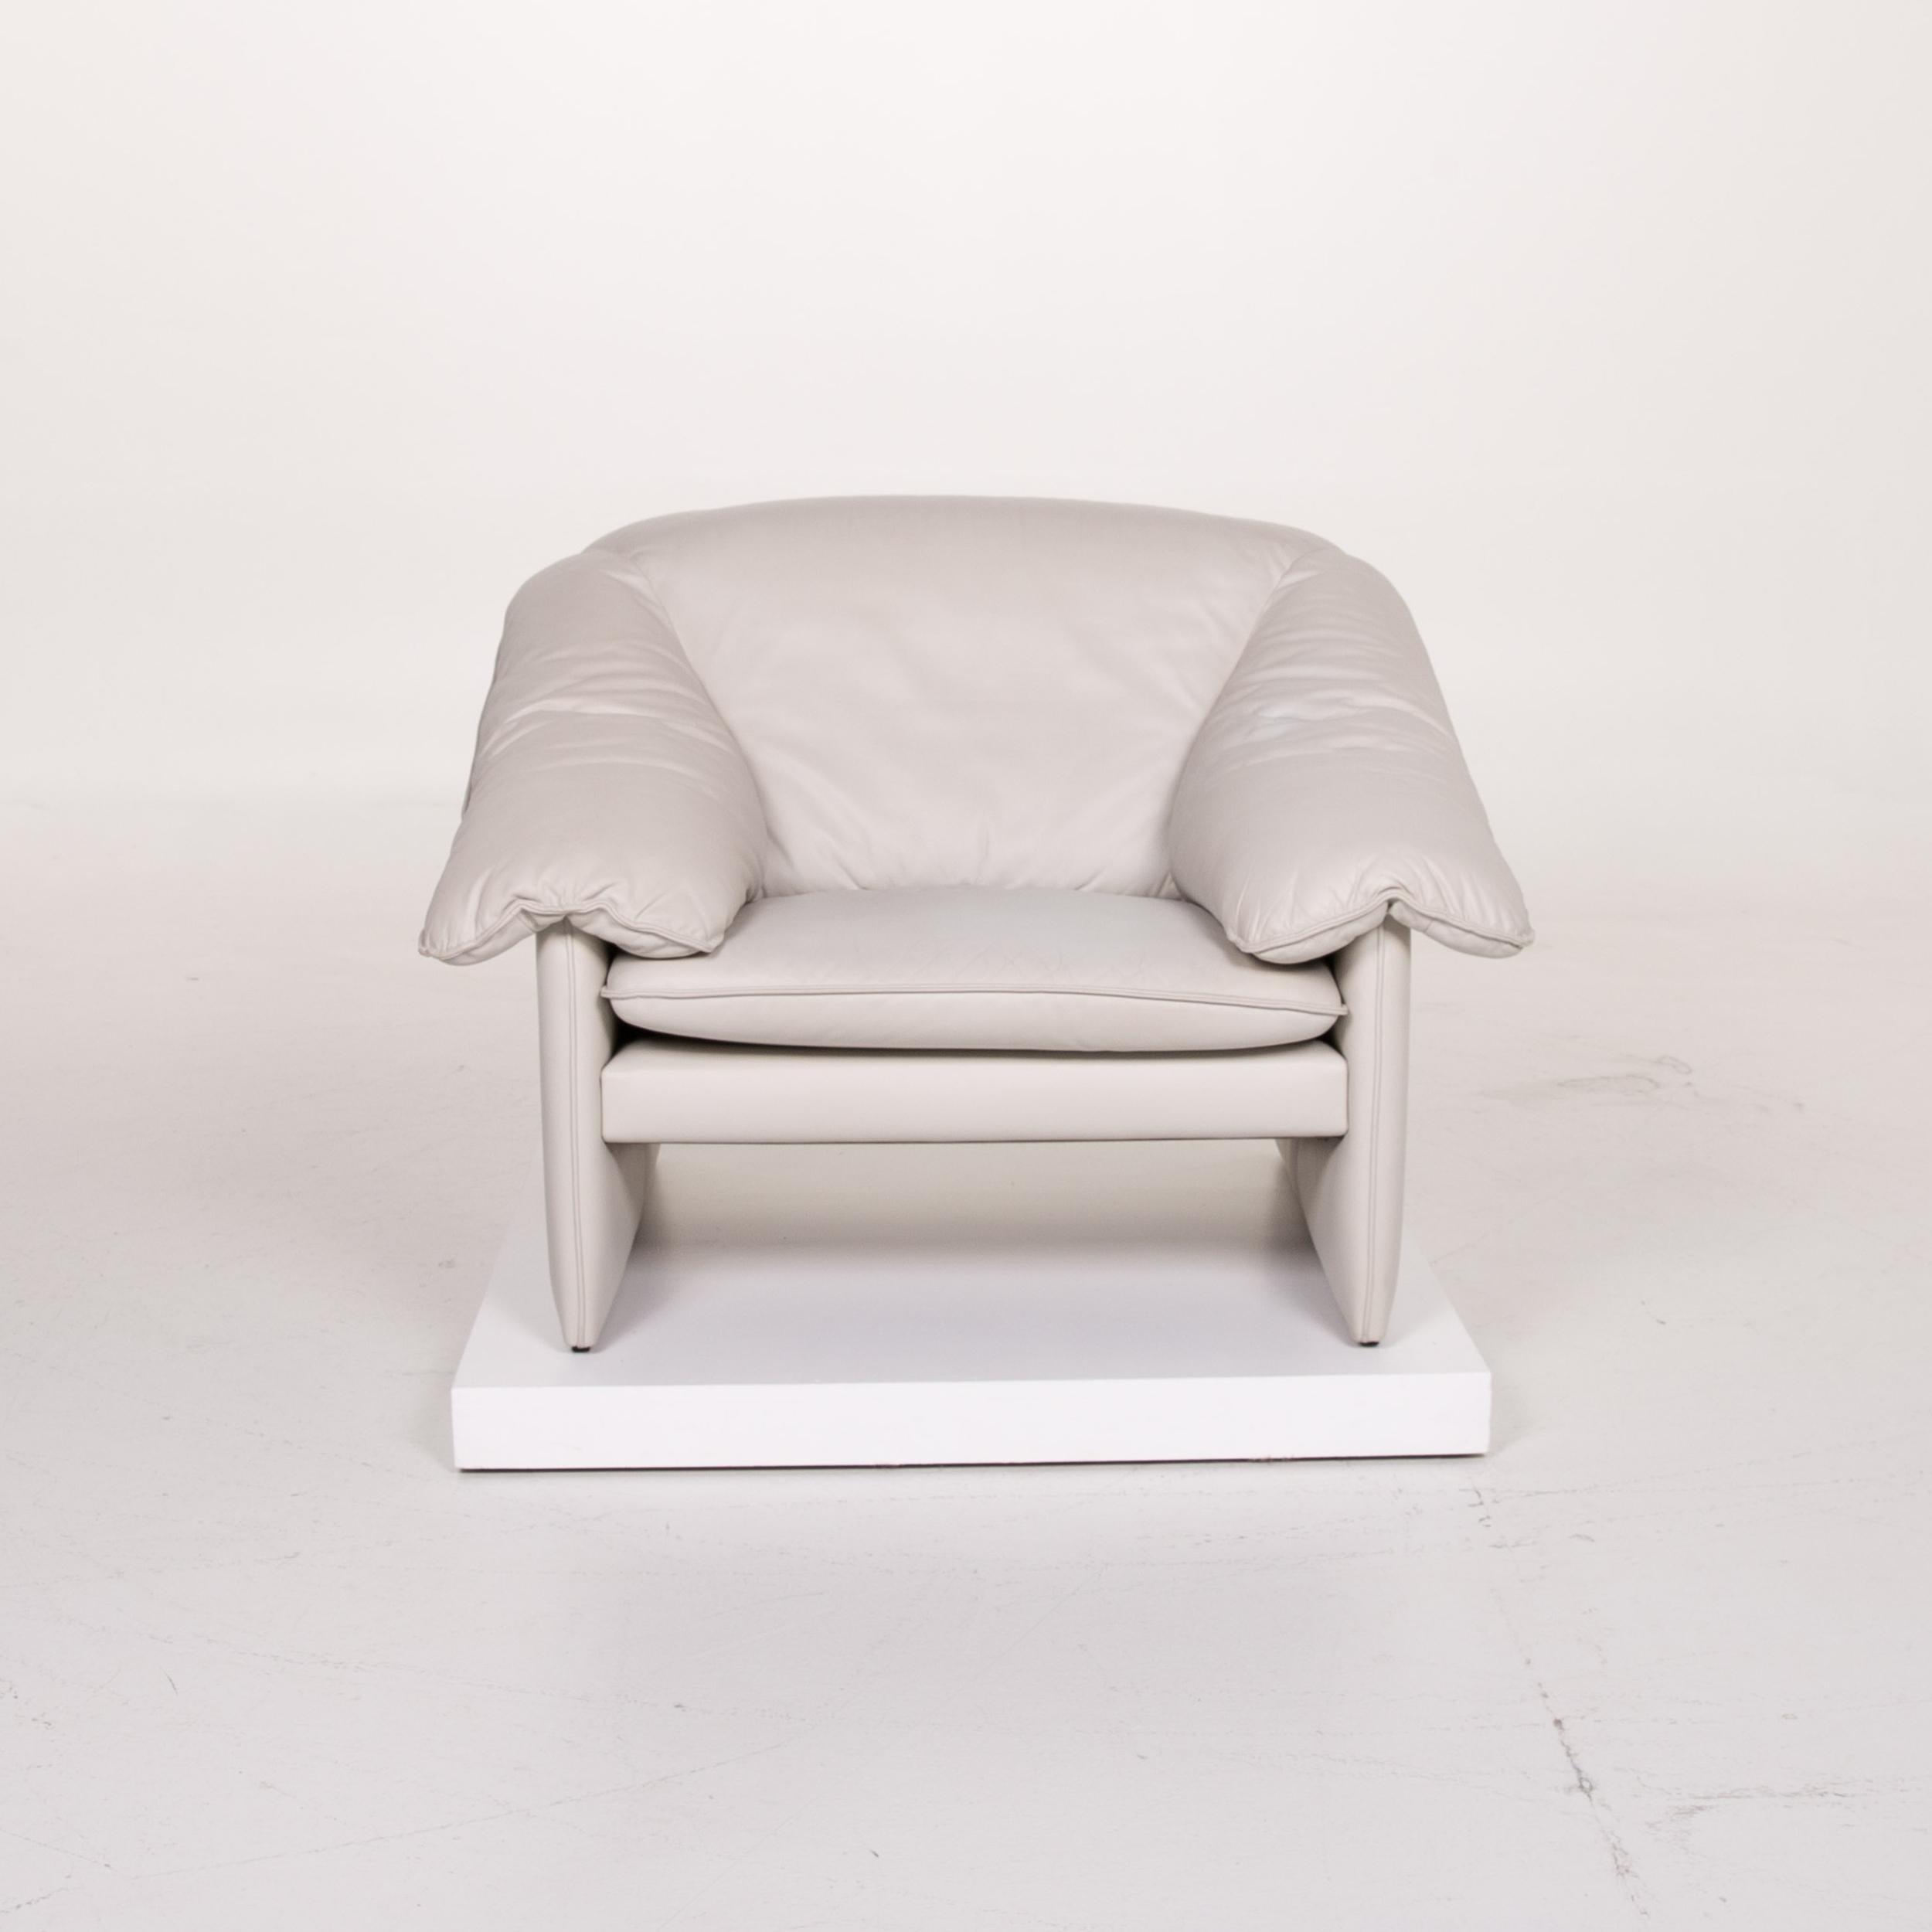 Leolux Mellow-Mink Leather Armchair Gray In Good Condition For Sale In Cologne, DE